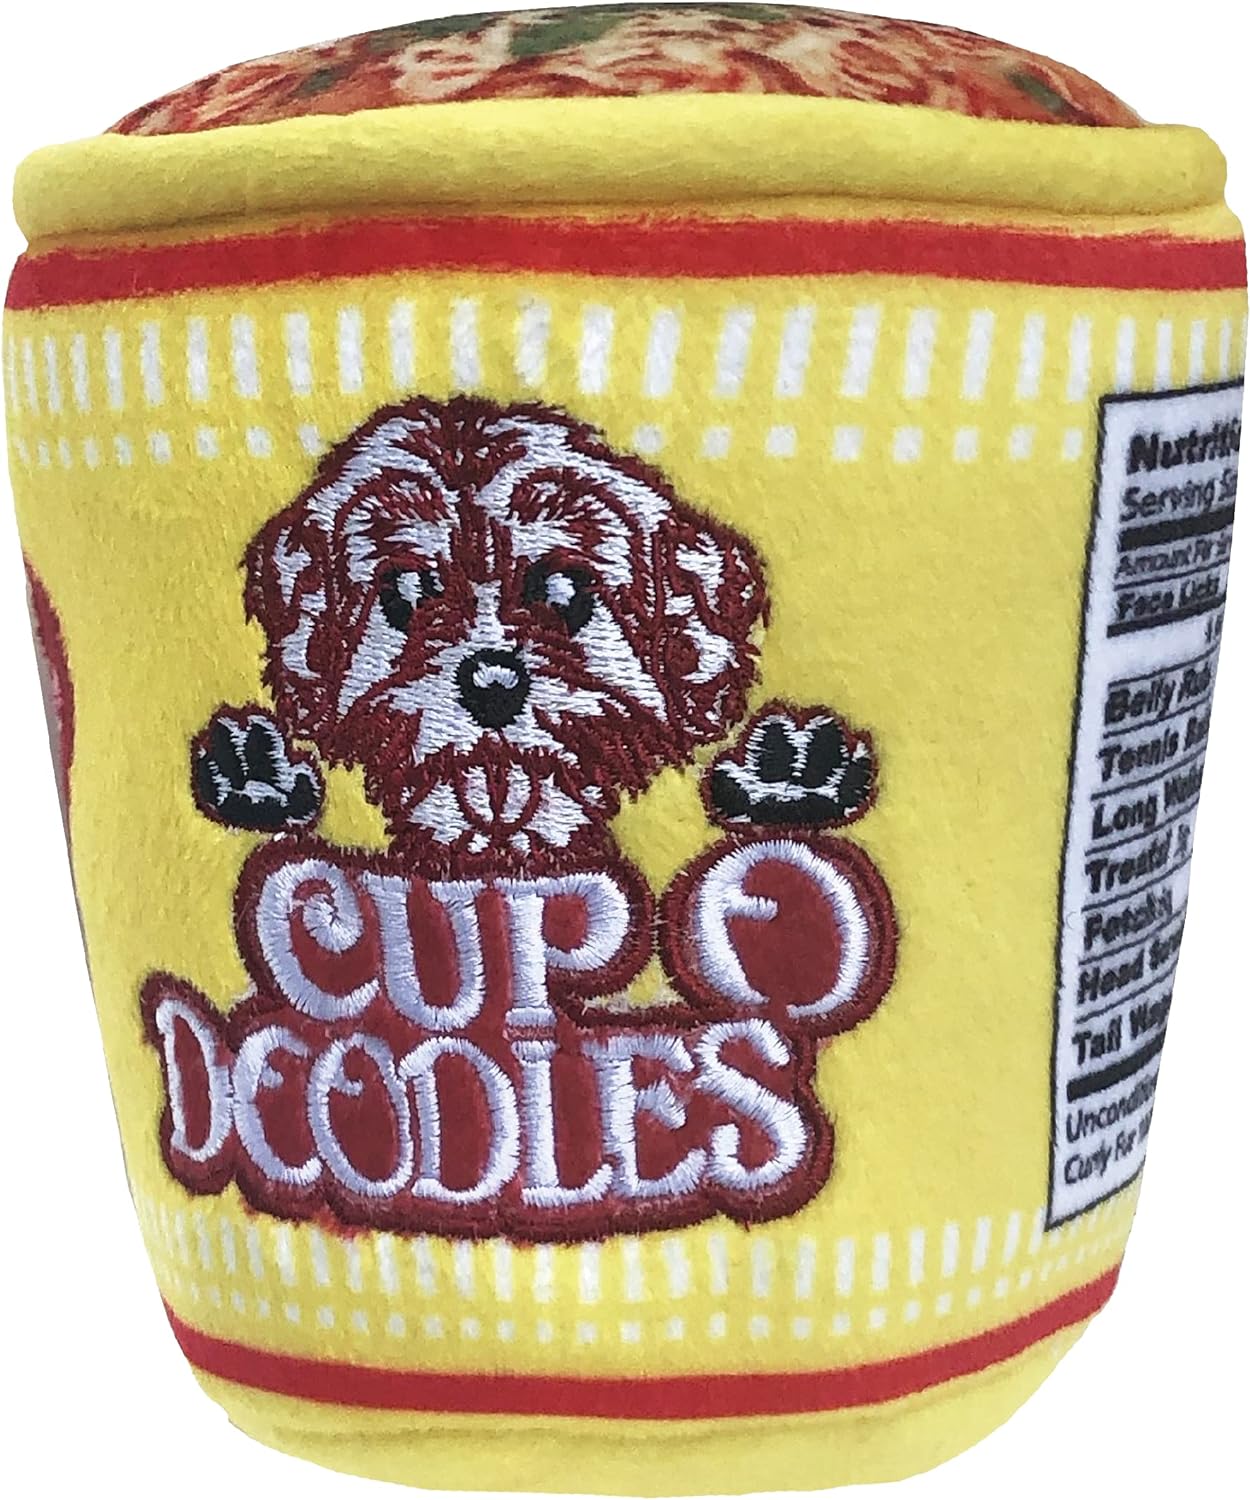 Lulubelles Power Plush Cup O Doodles Dog Toy with Squeaker-Large